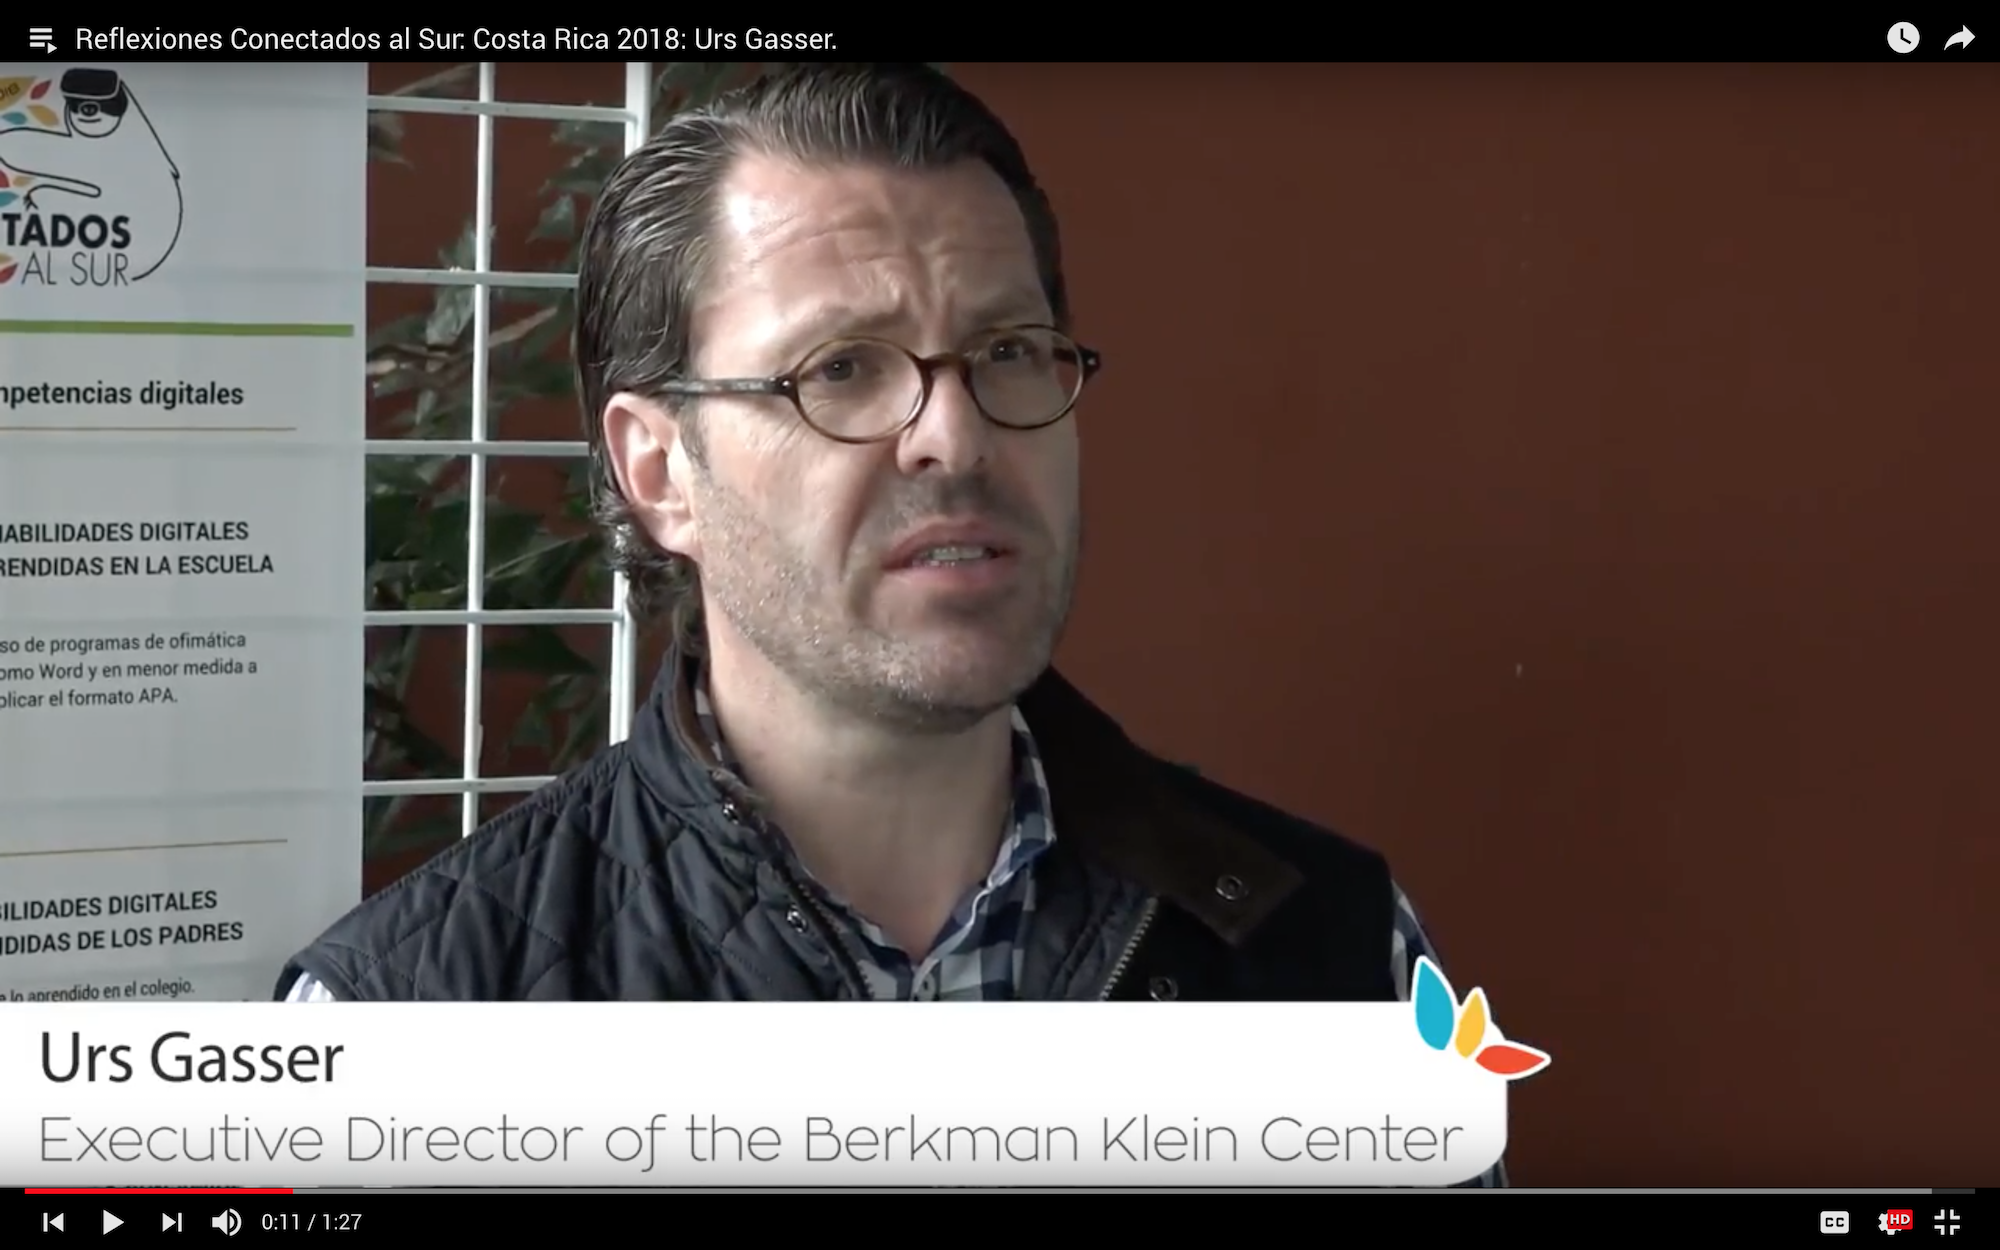 Urs Gasser, executive director of the Berkman Klein Center and Professor at Harvard Law School shares his reflections about Conectados al Sur: Costa Rica